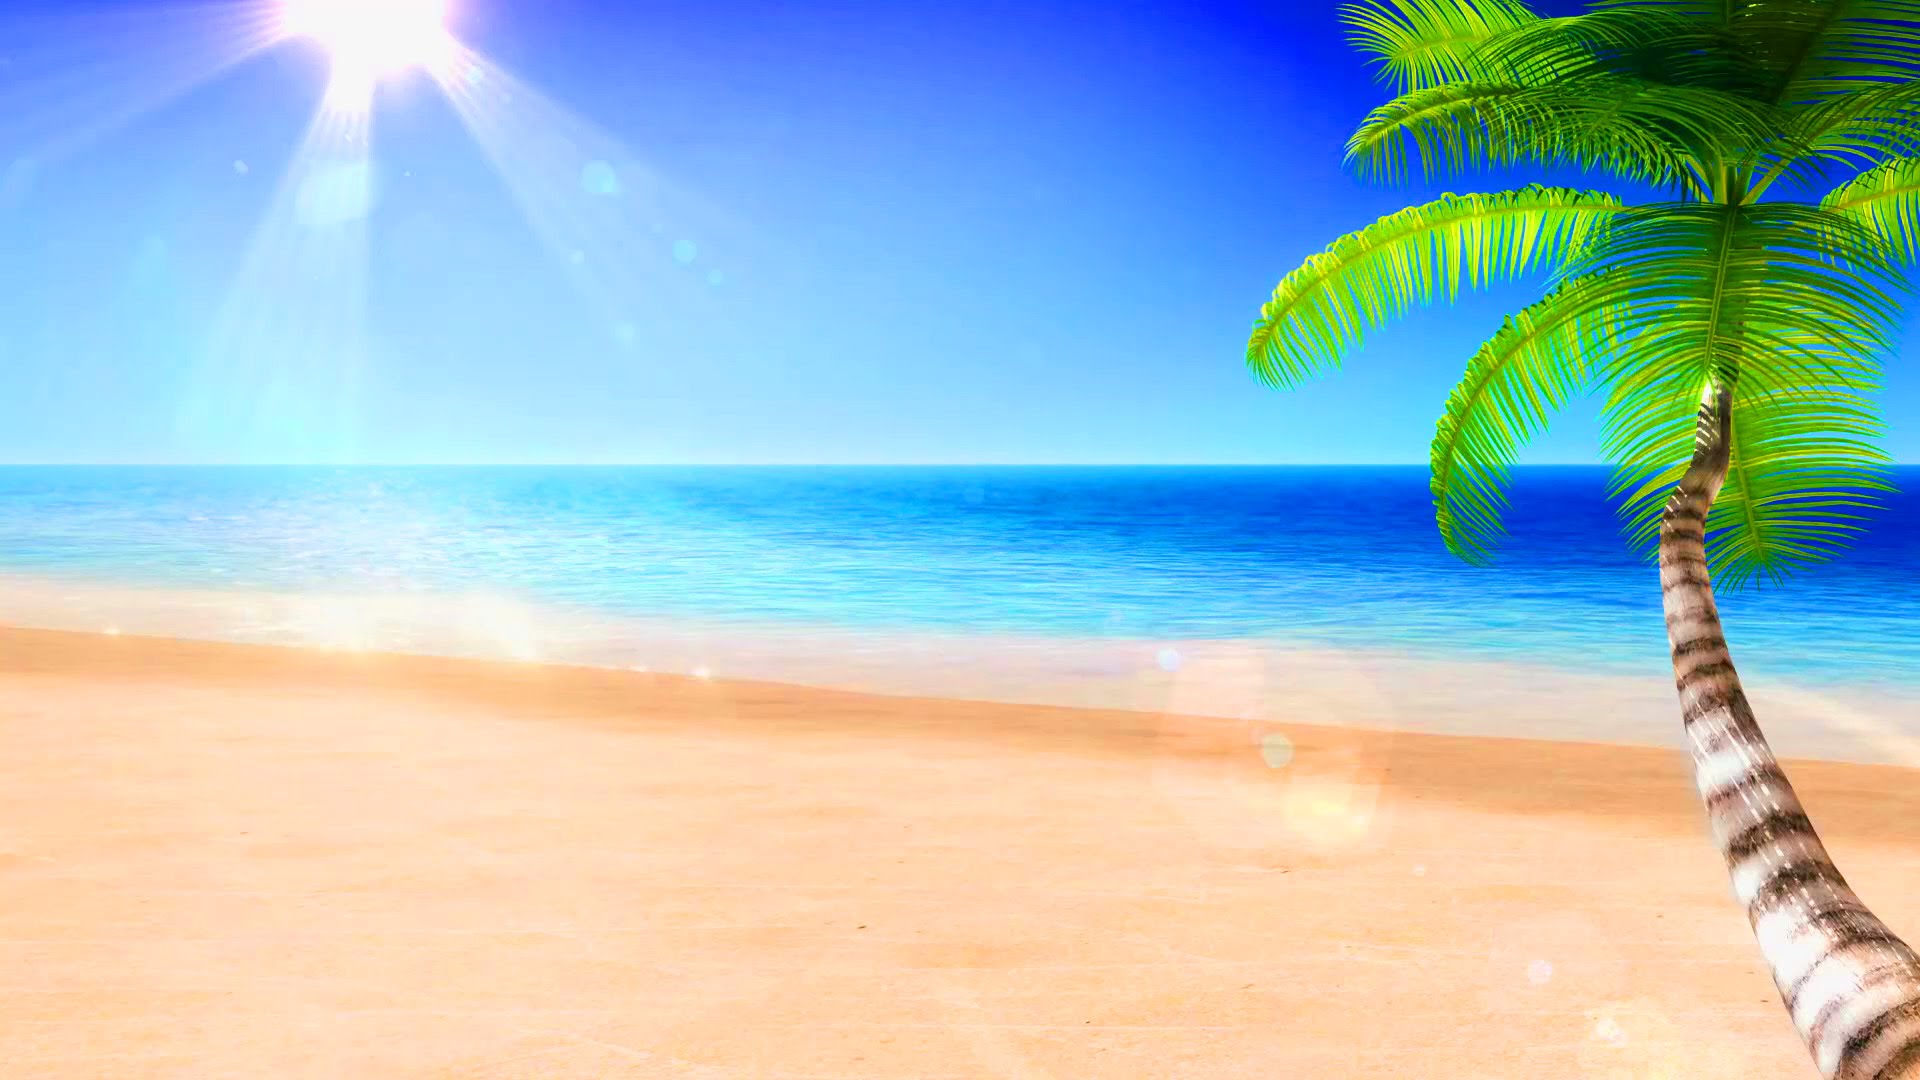 Tropical Beach Wallpapers Pictures Images